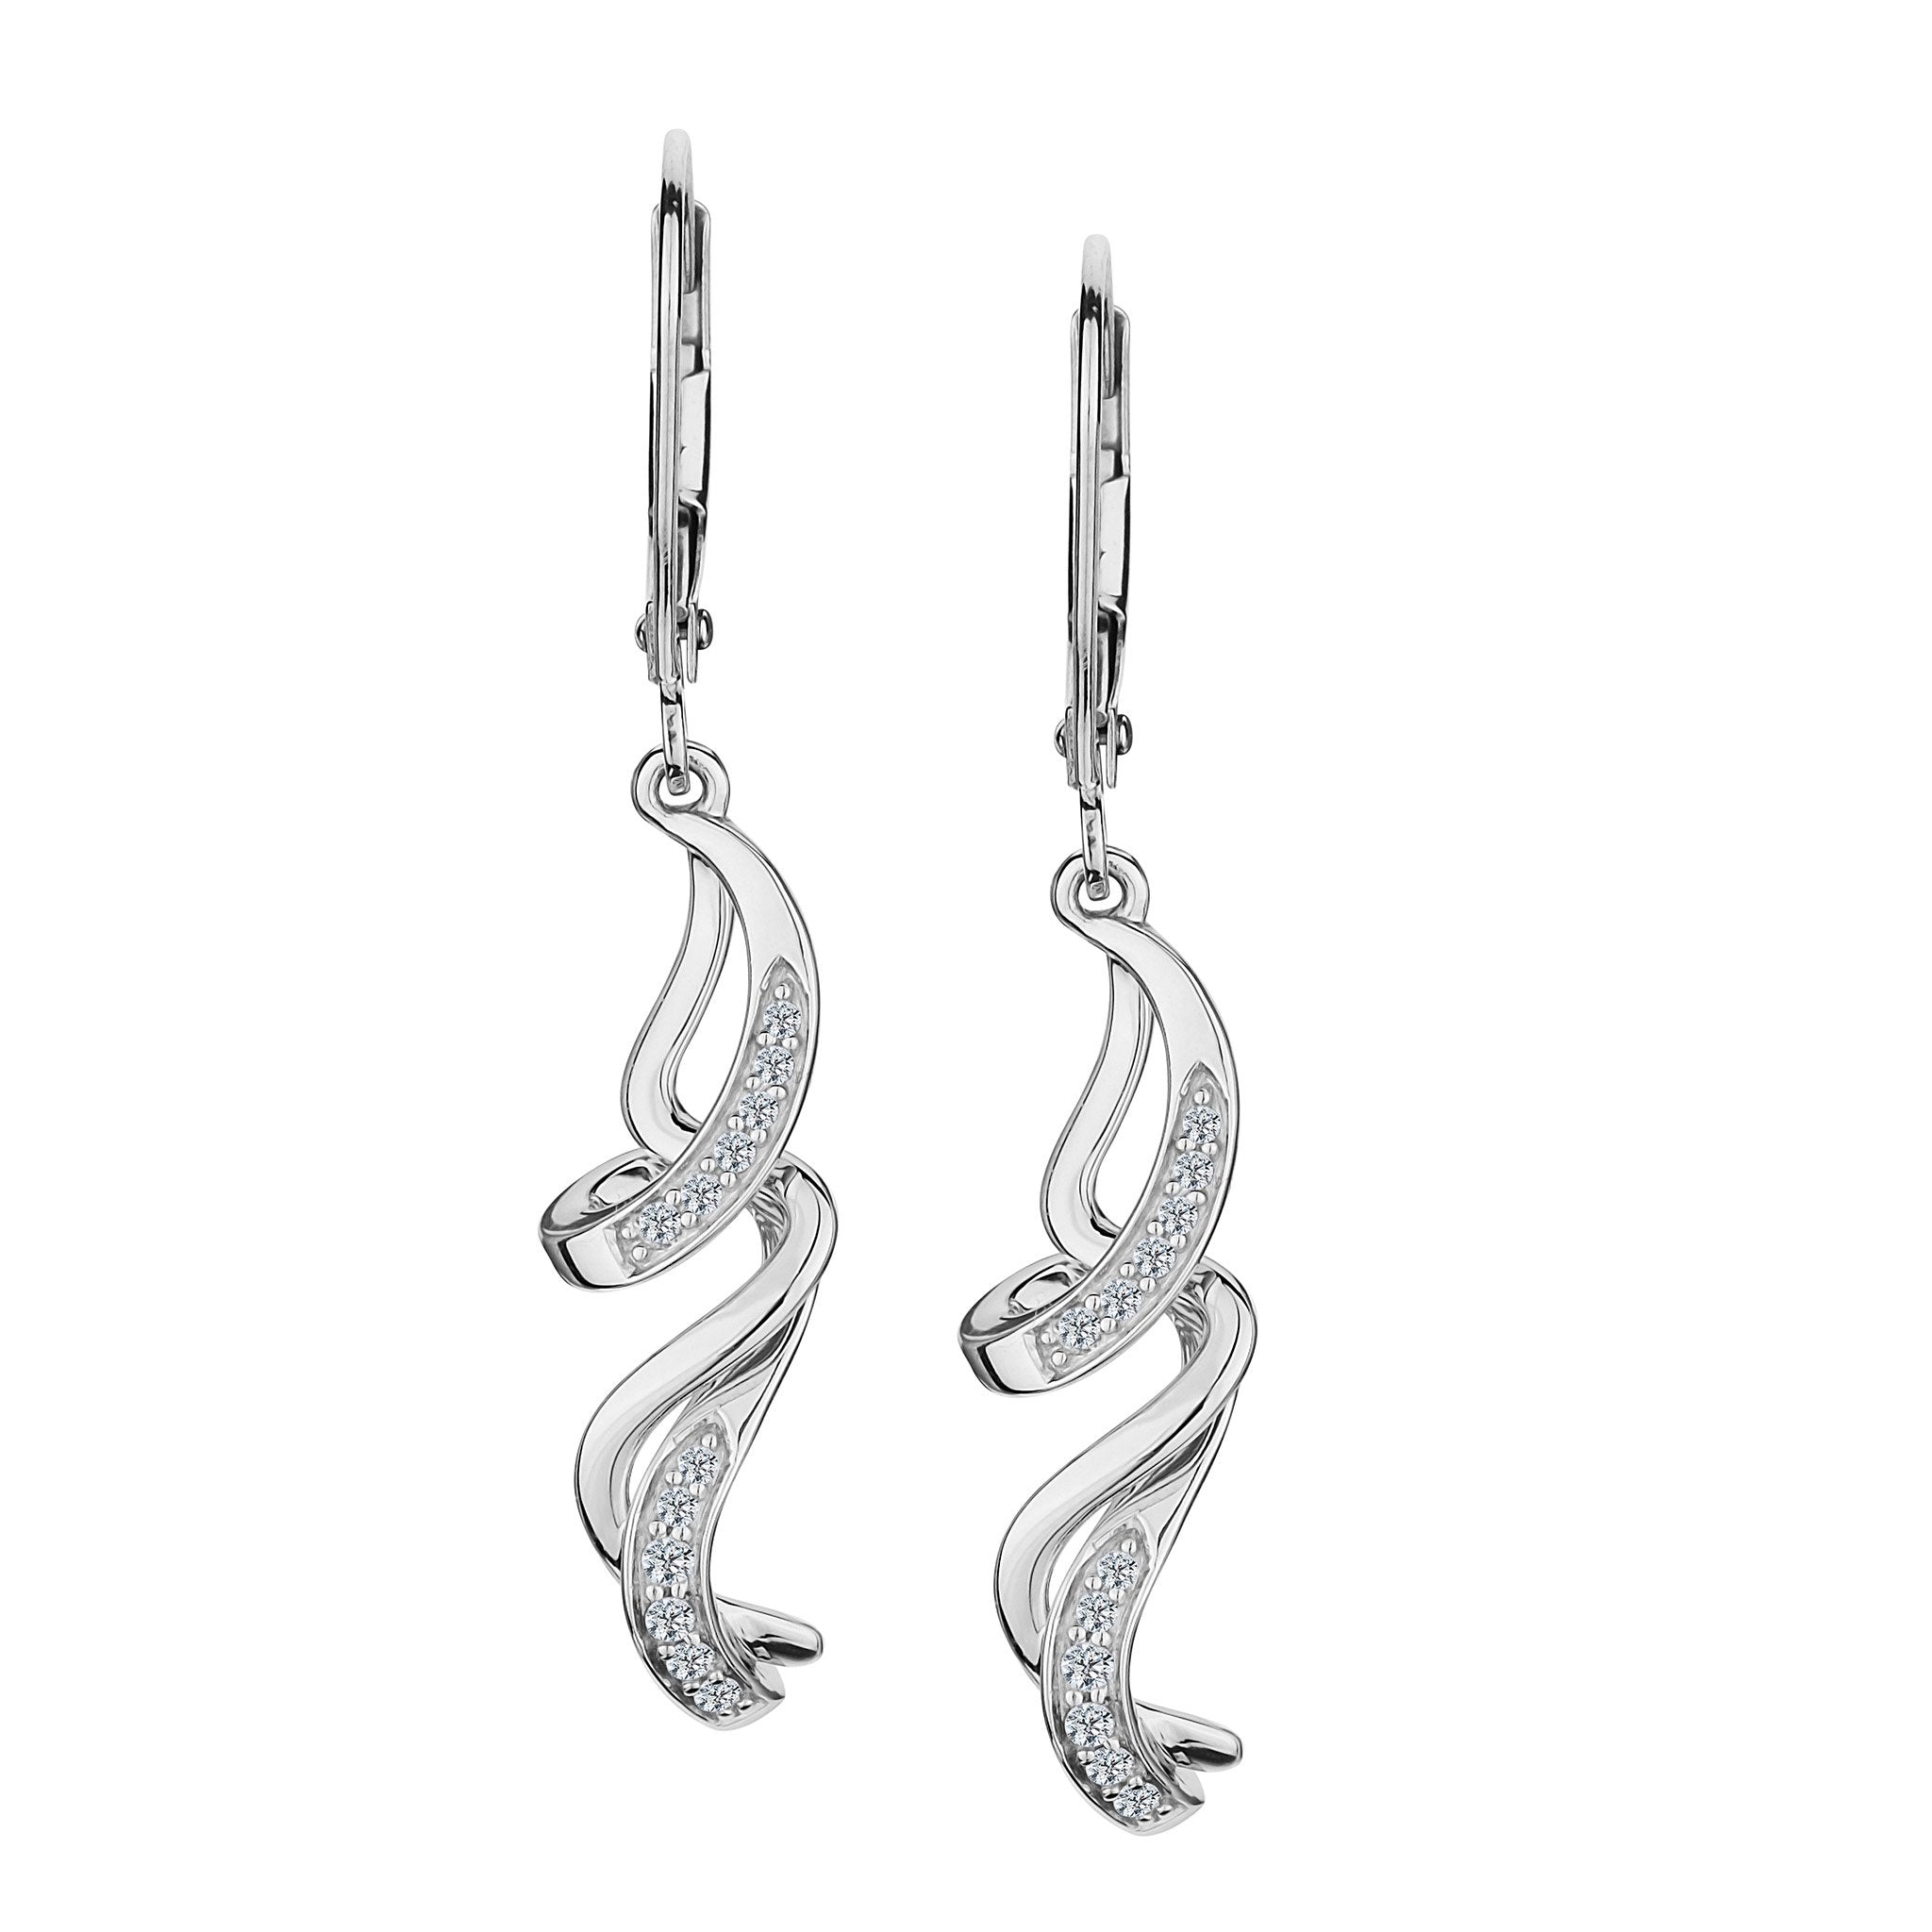 .13 Carat Diamond Drop Pave Lever Back Earrings,  10kt White Gold. Griffin Jewellery Designs